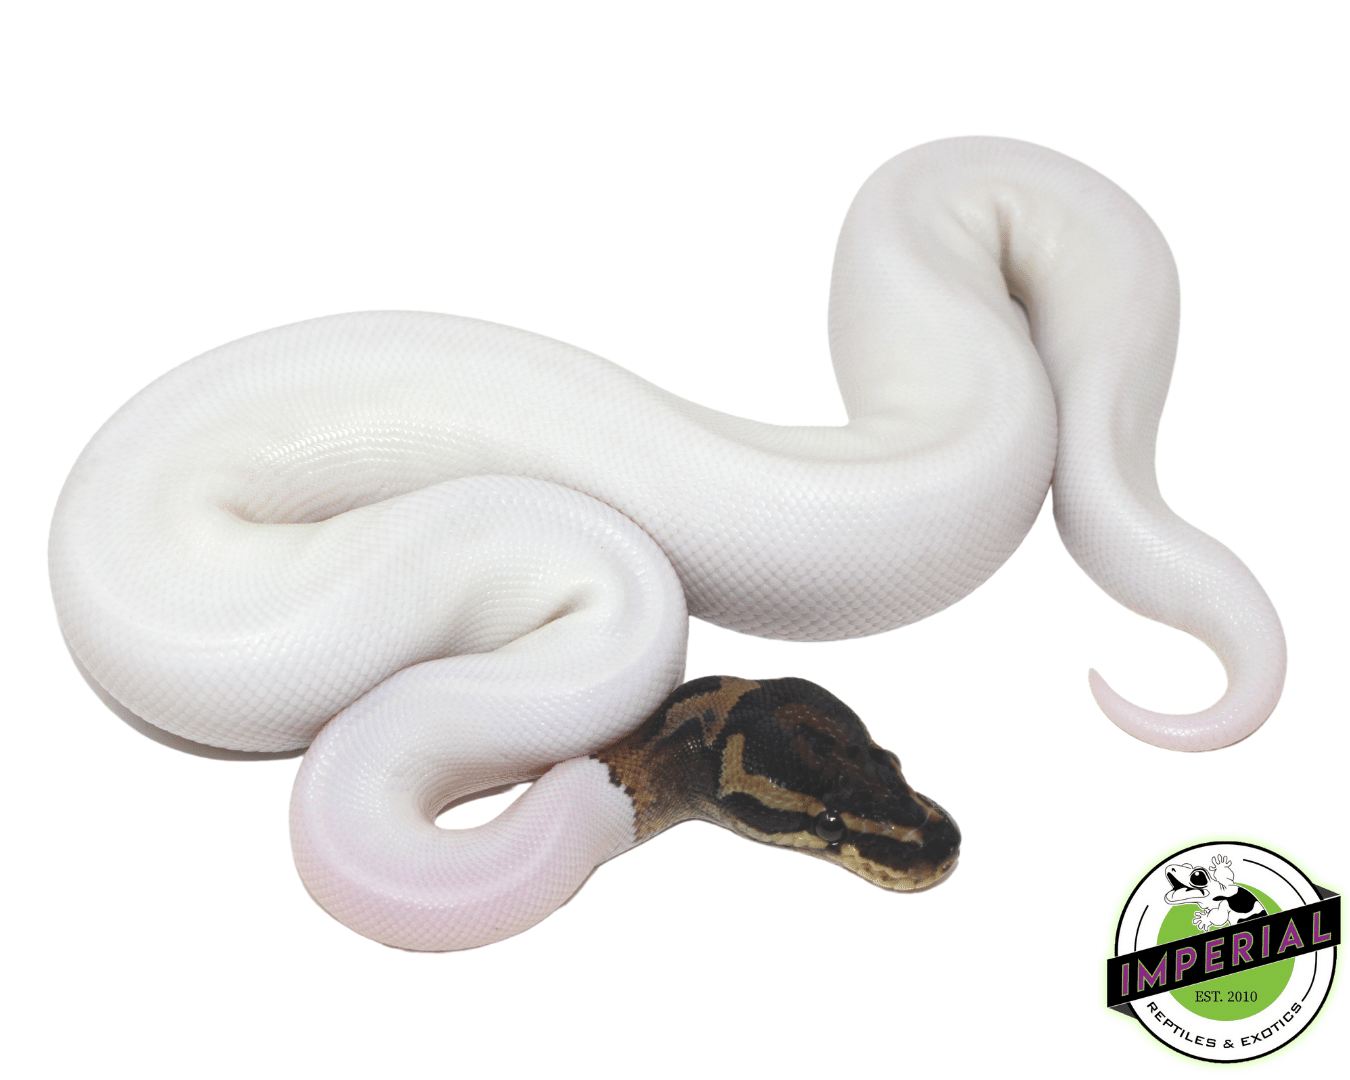 pied ball python for sale, buy reptiles online